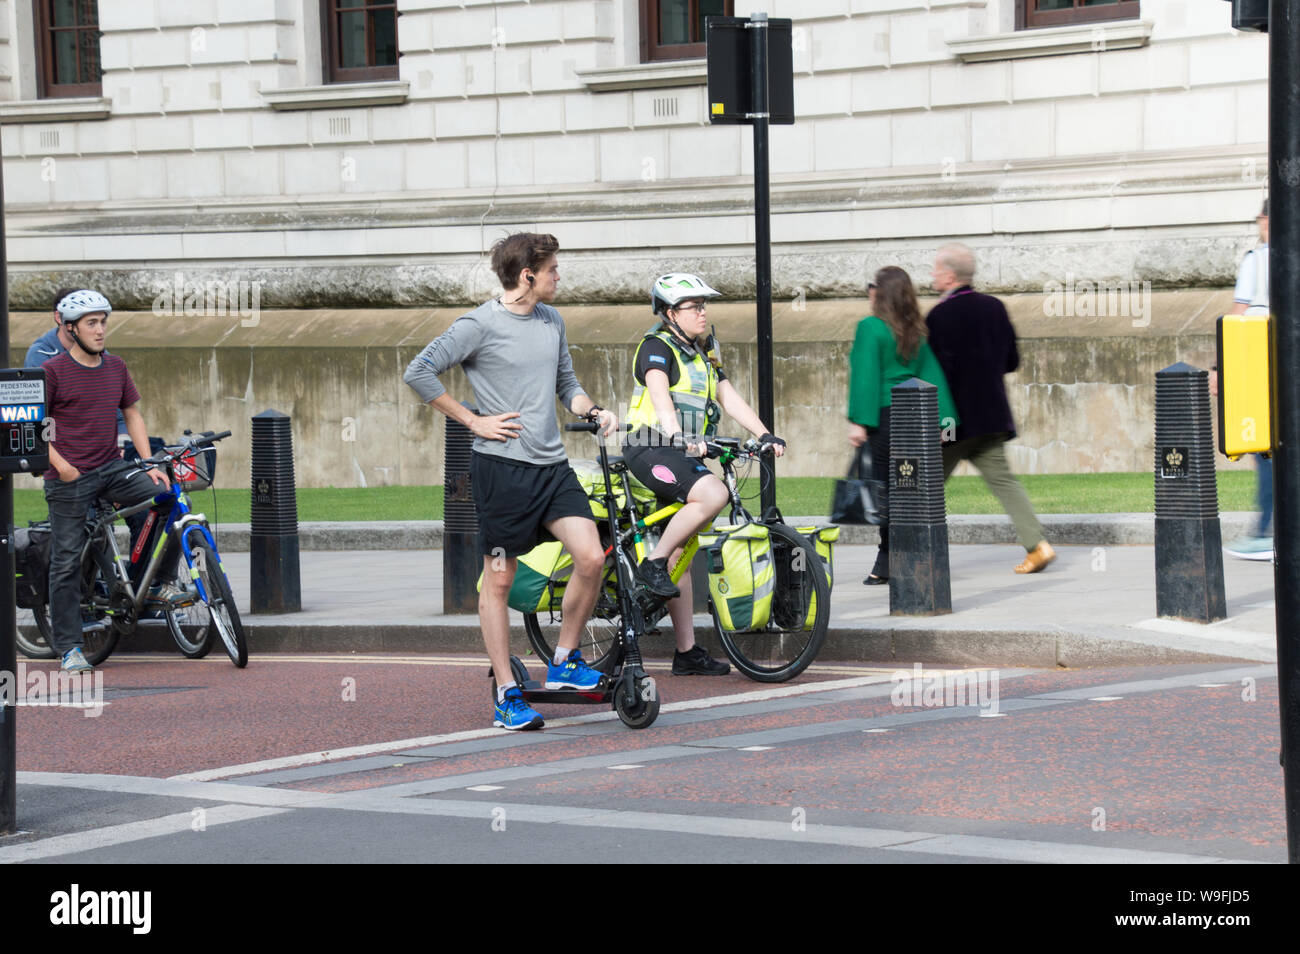 Woman paramedic in bicycle at London signal waiting for signal to turn green Stock Photo